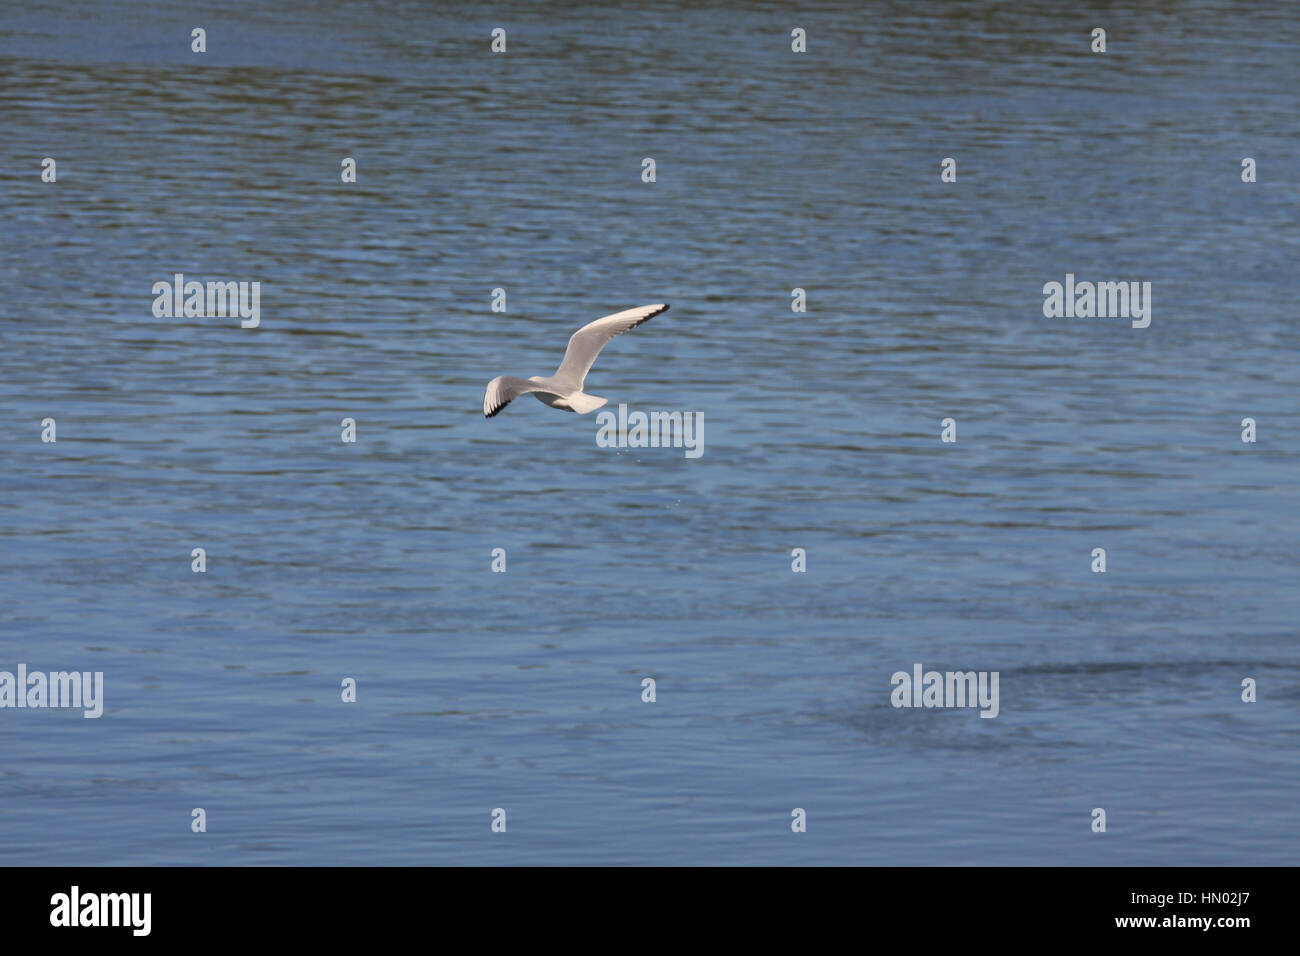 A seagull is flying over the sea. Stock Photo